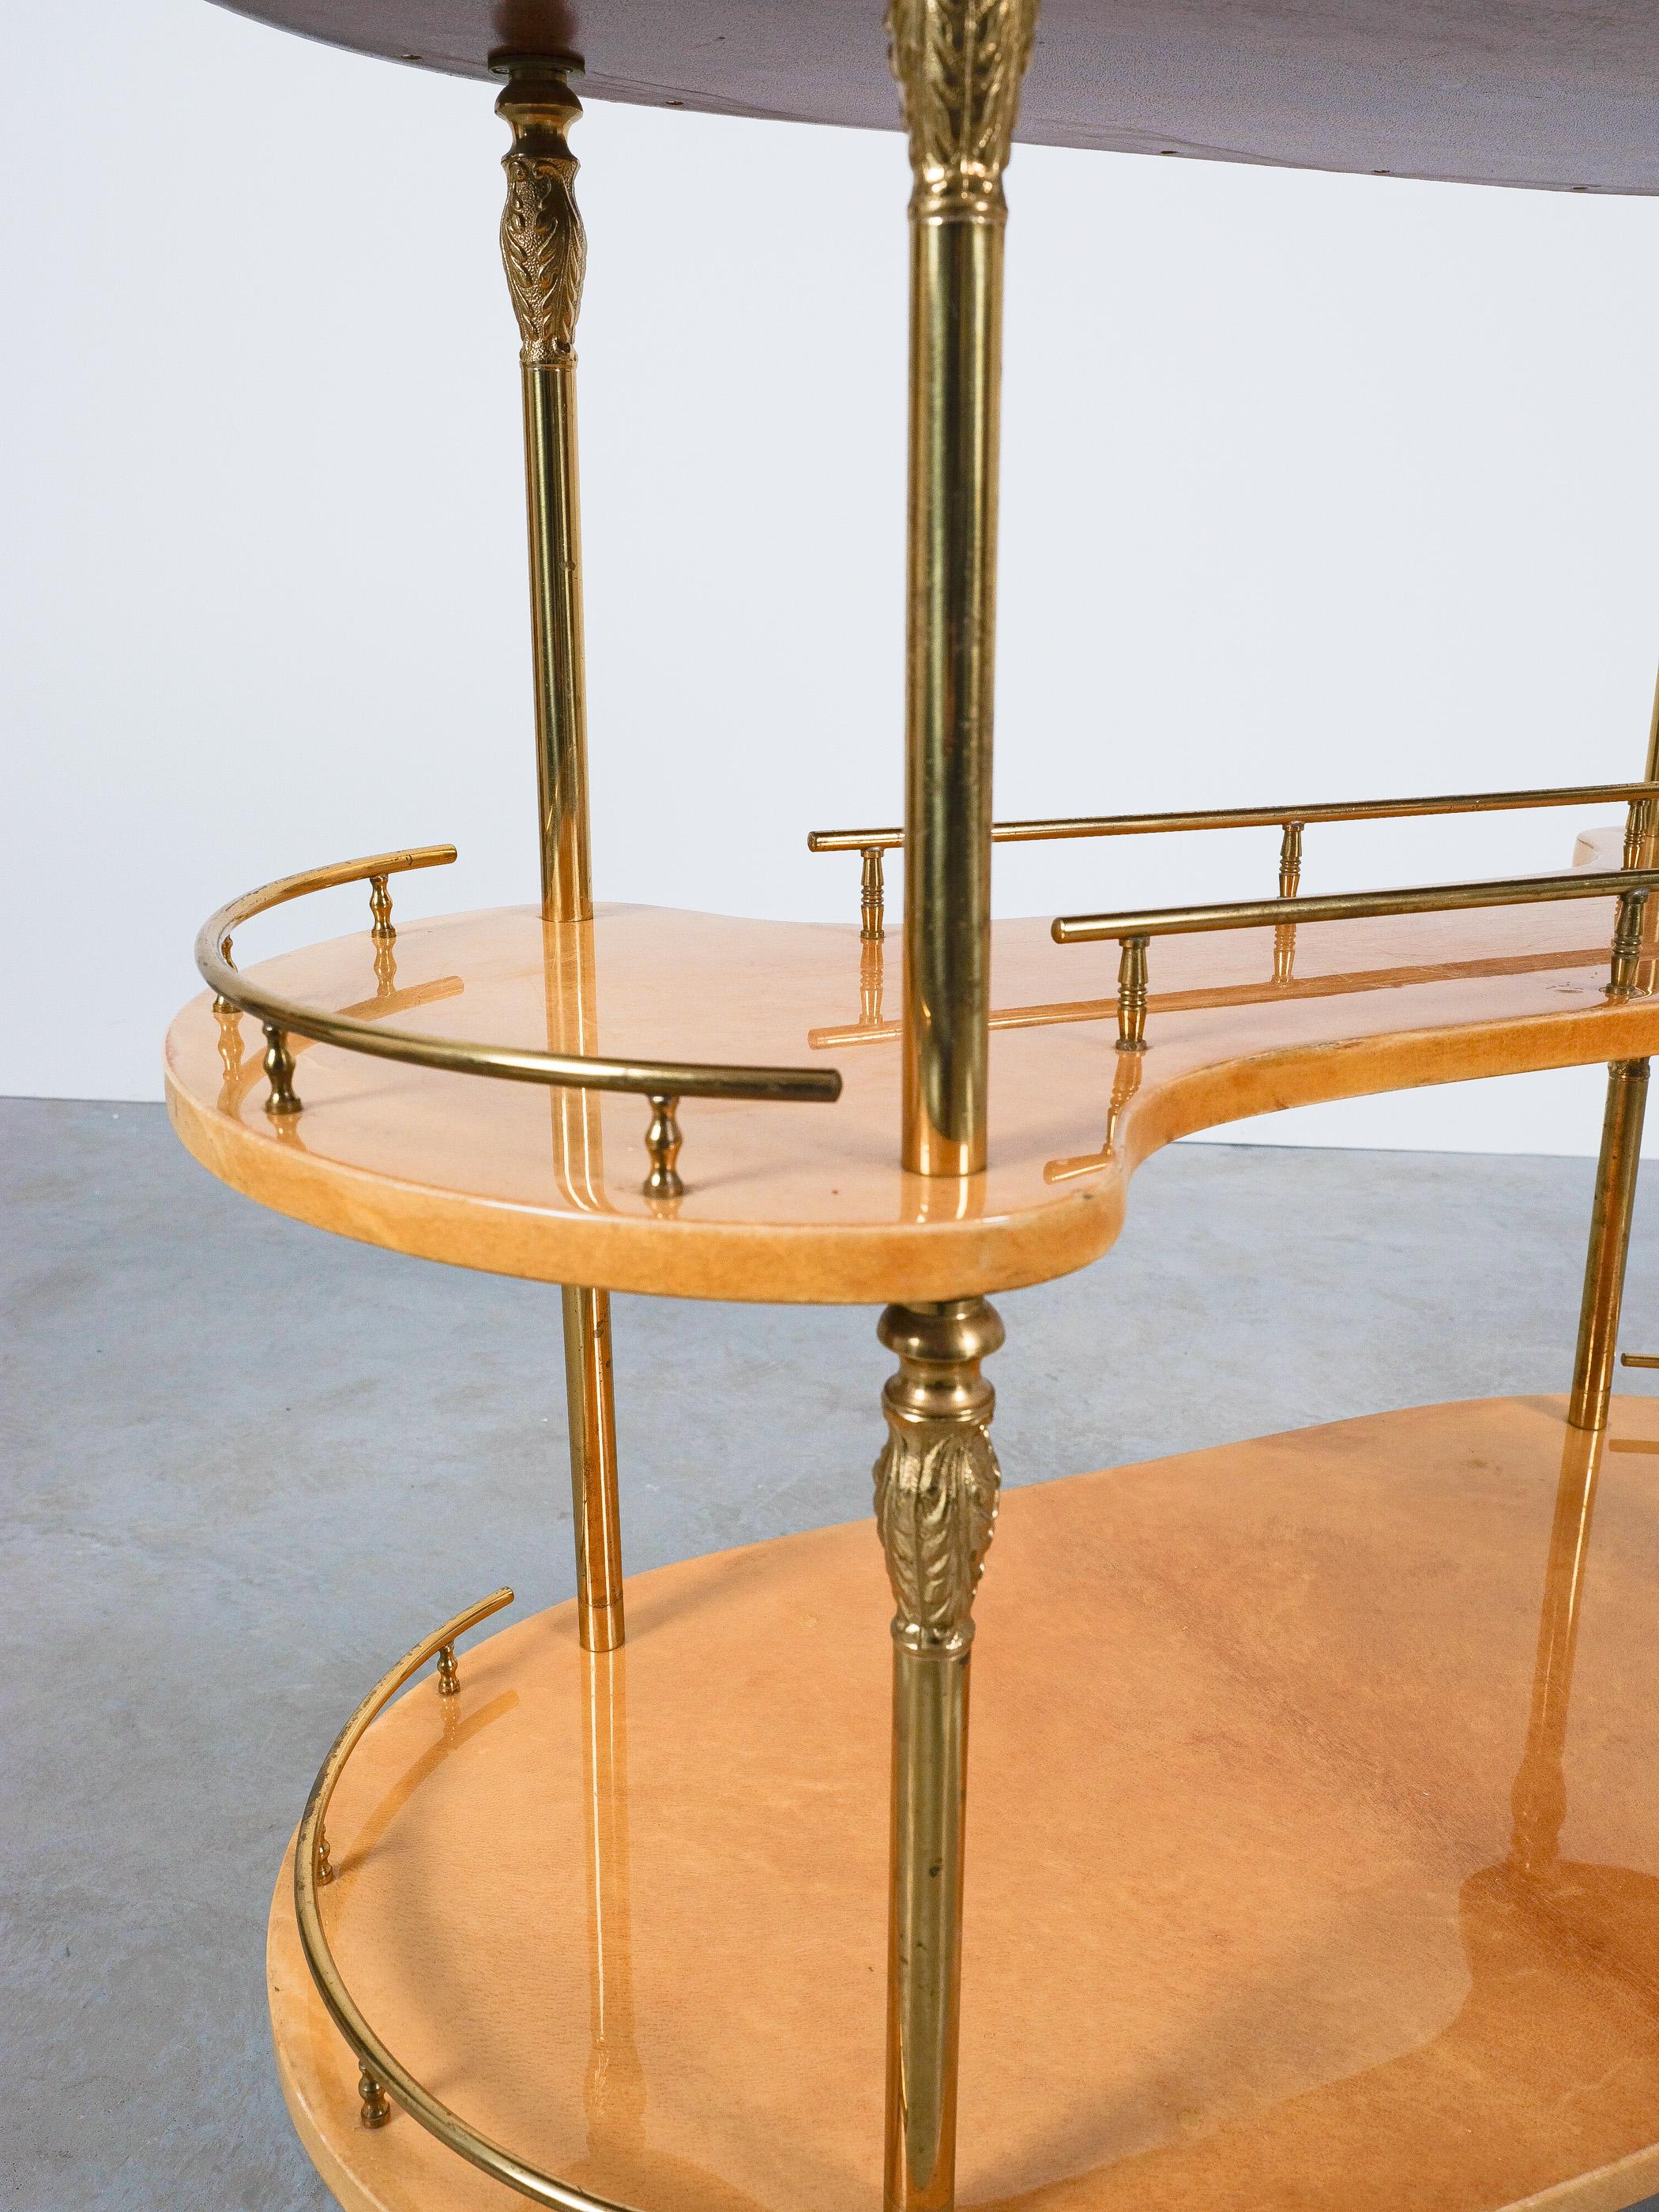 Aldo Tura Bar Cart Tan Parchment Brass Columns, Italy, 1970 In Good Condition For Sale In Vienna, AT